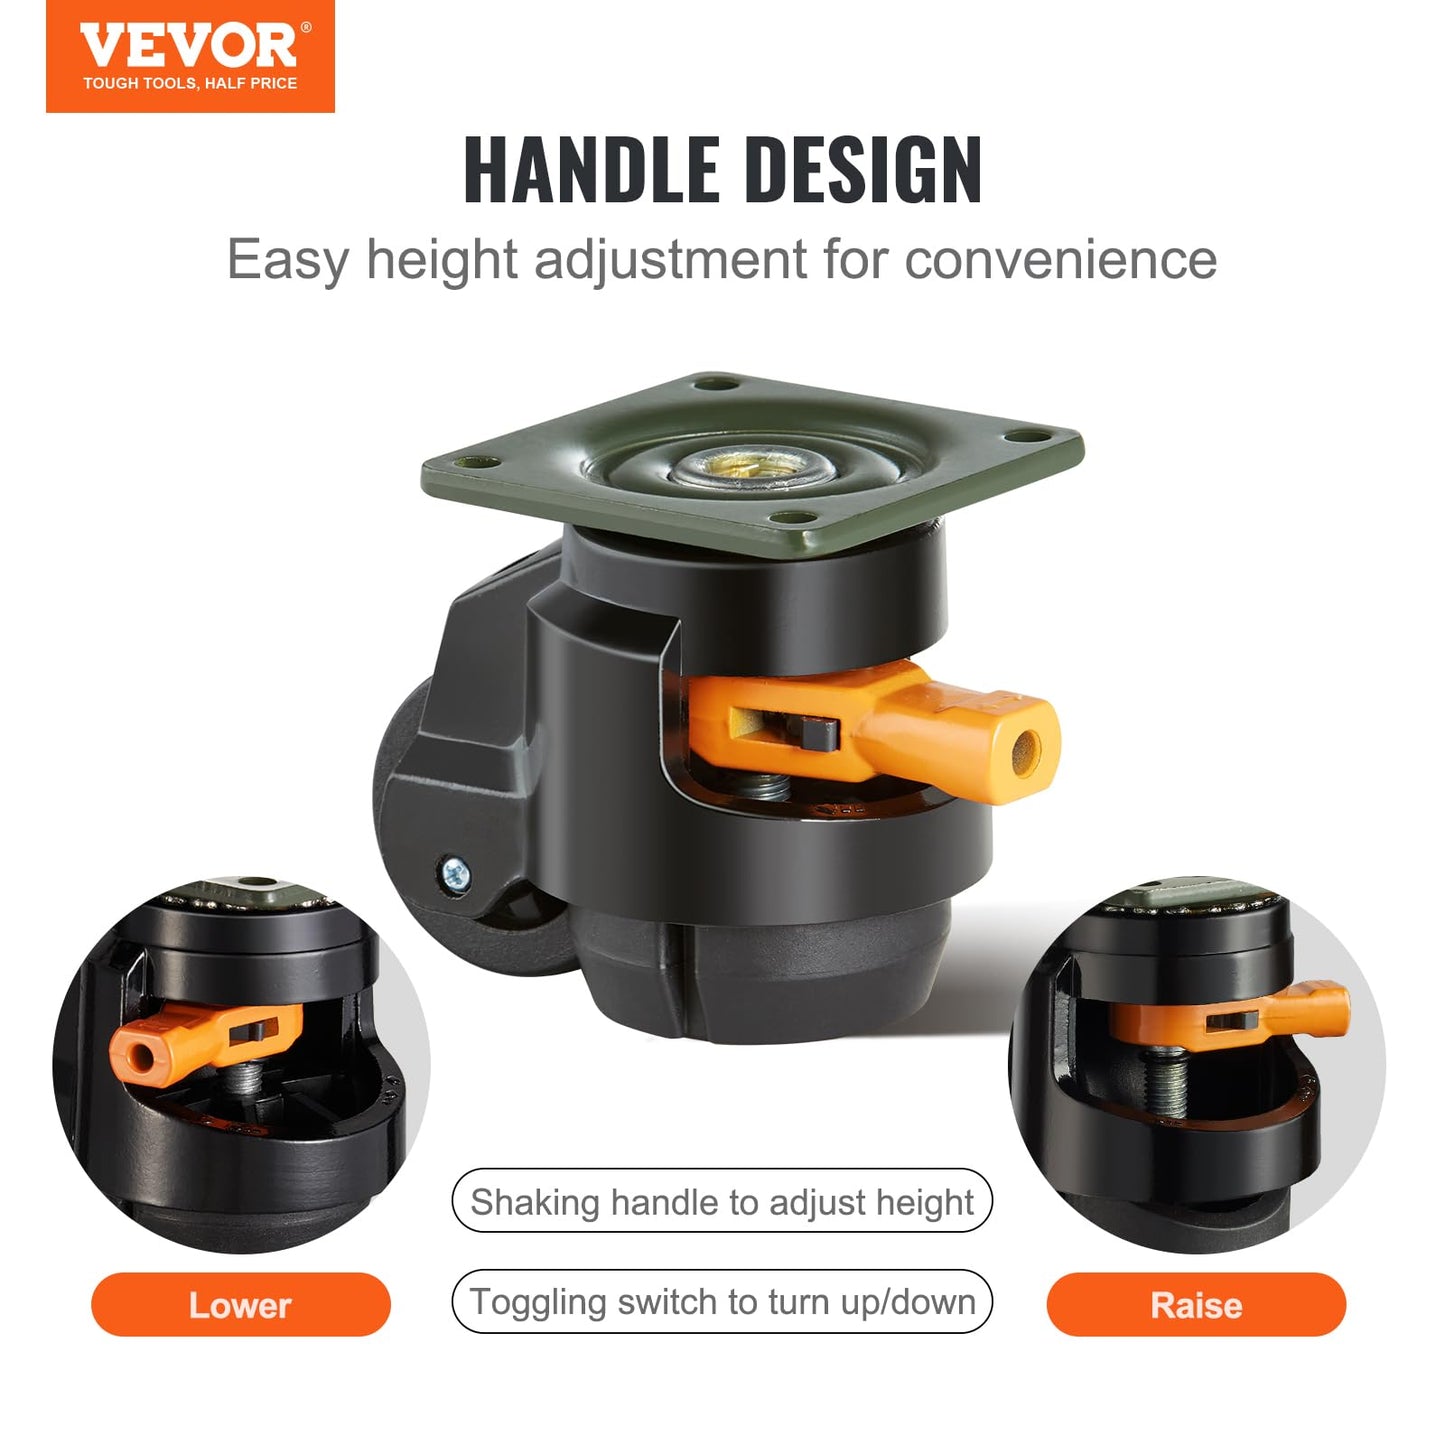 VEVOR Leveling Casters, Set of 4, 2200 lbs Total Load Capacity, 2 inches, Heavy Duty with Upgraded Handle Design, 360 Degree Swivel Caster Wheels,